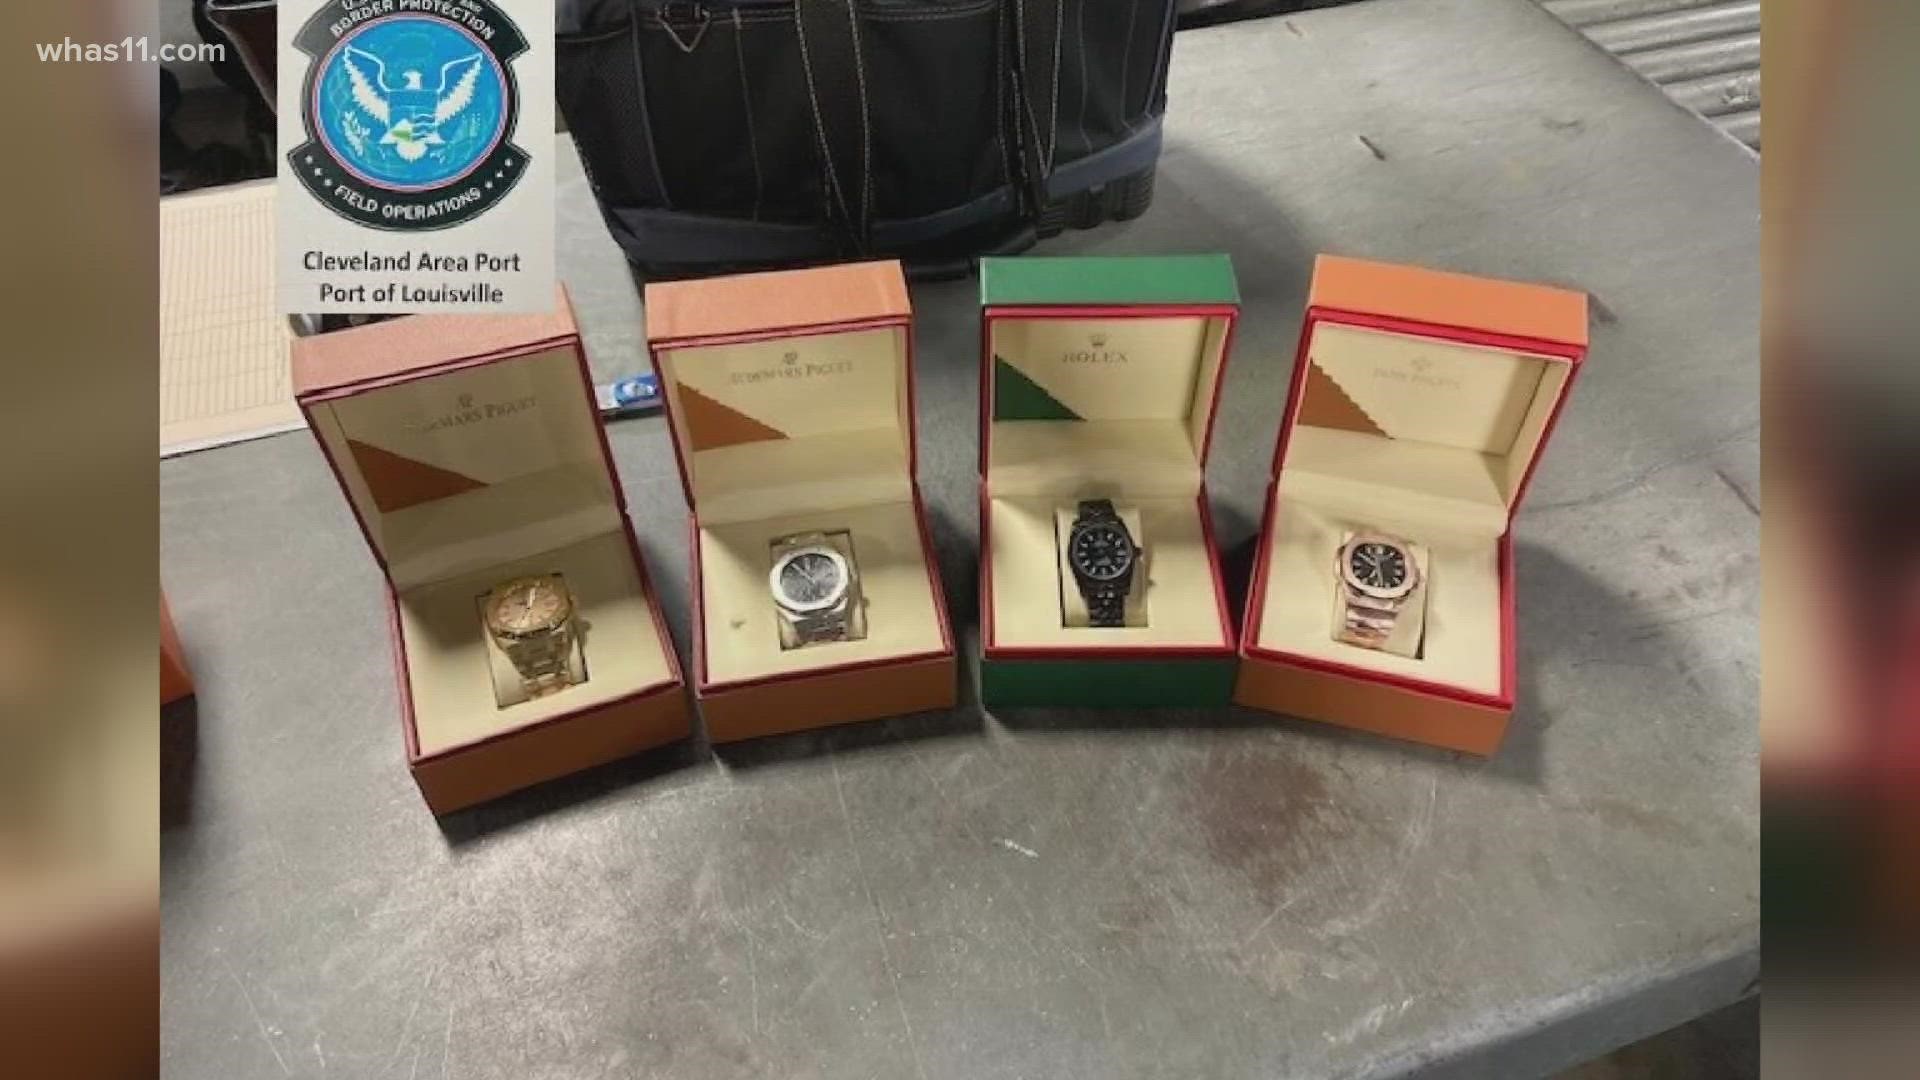 U.S. Customs and Border Protection (CBP) officers seized seven shipments and found 54 counterfeit designer watches worth $26.86 million if authentic.